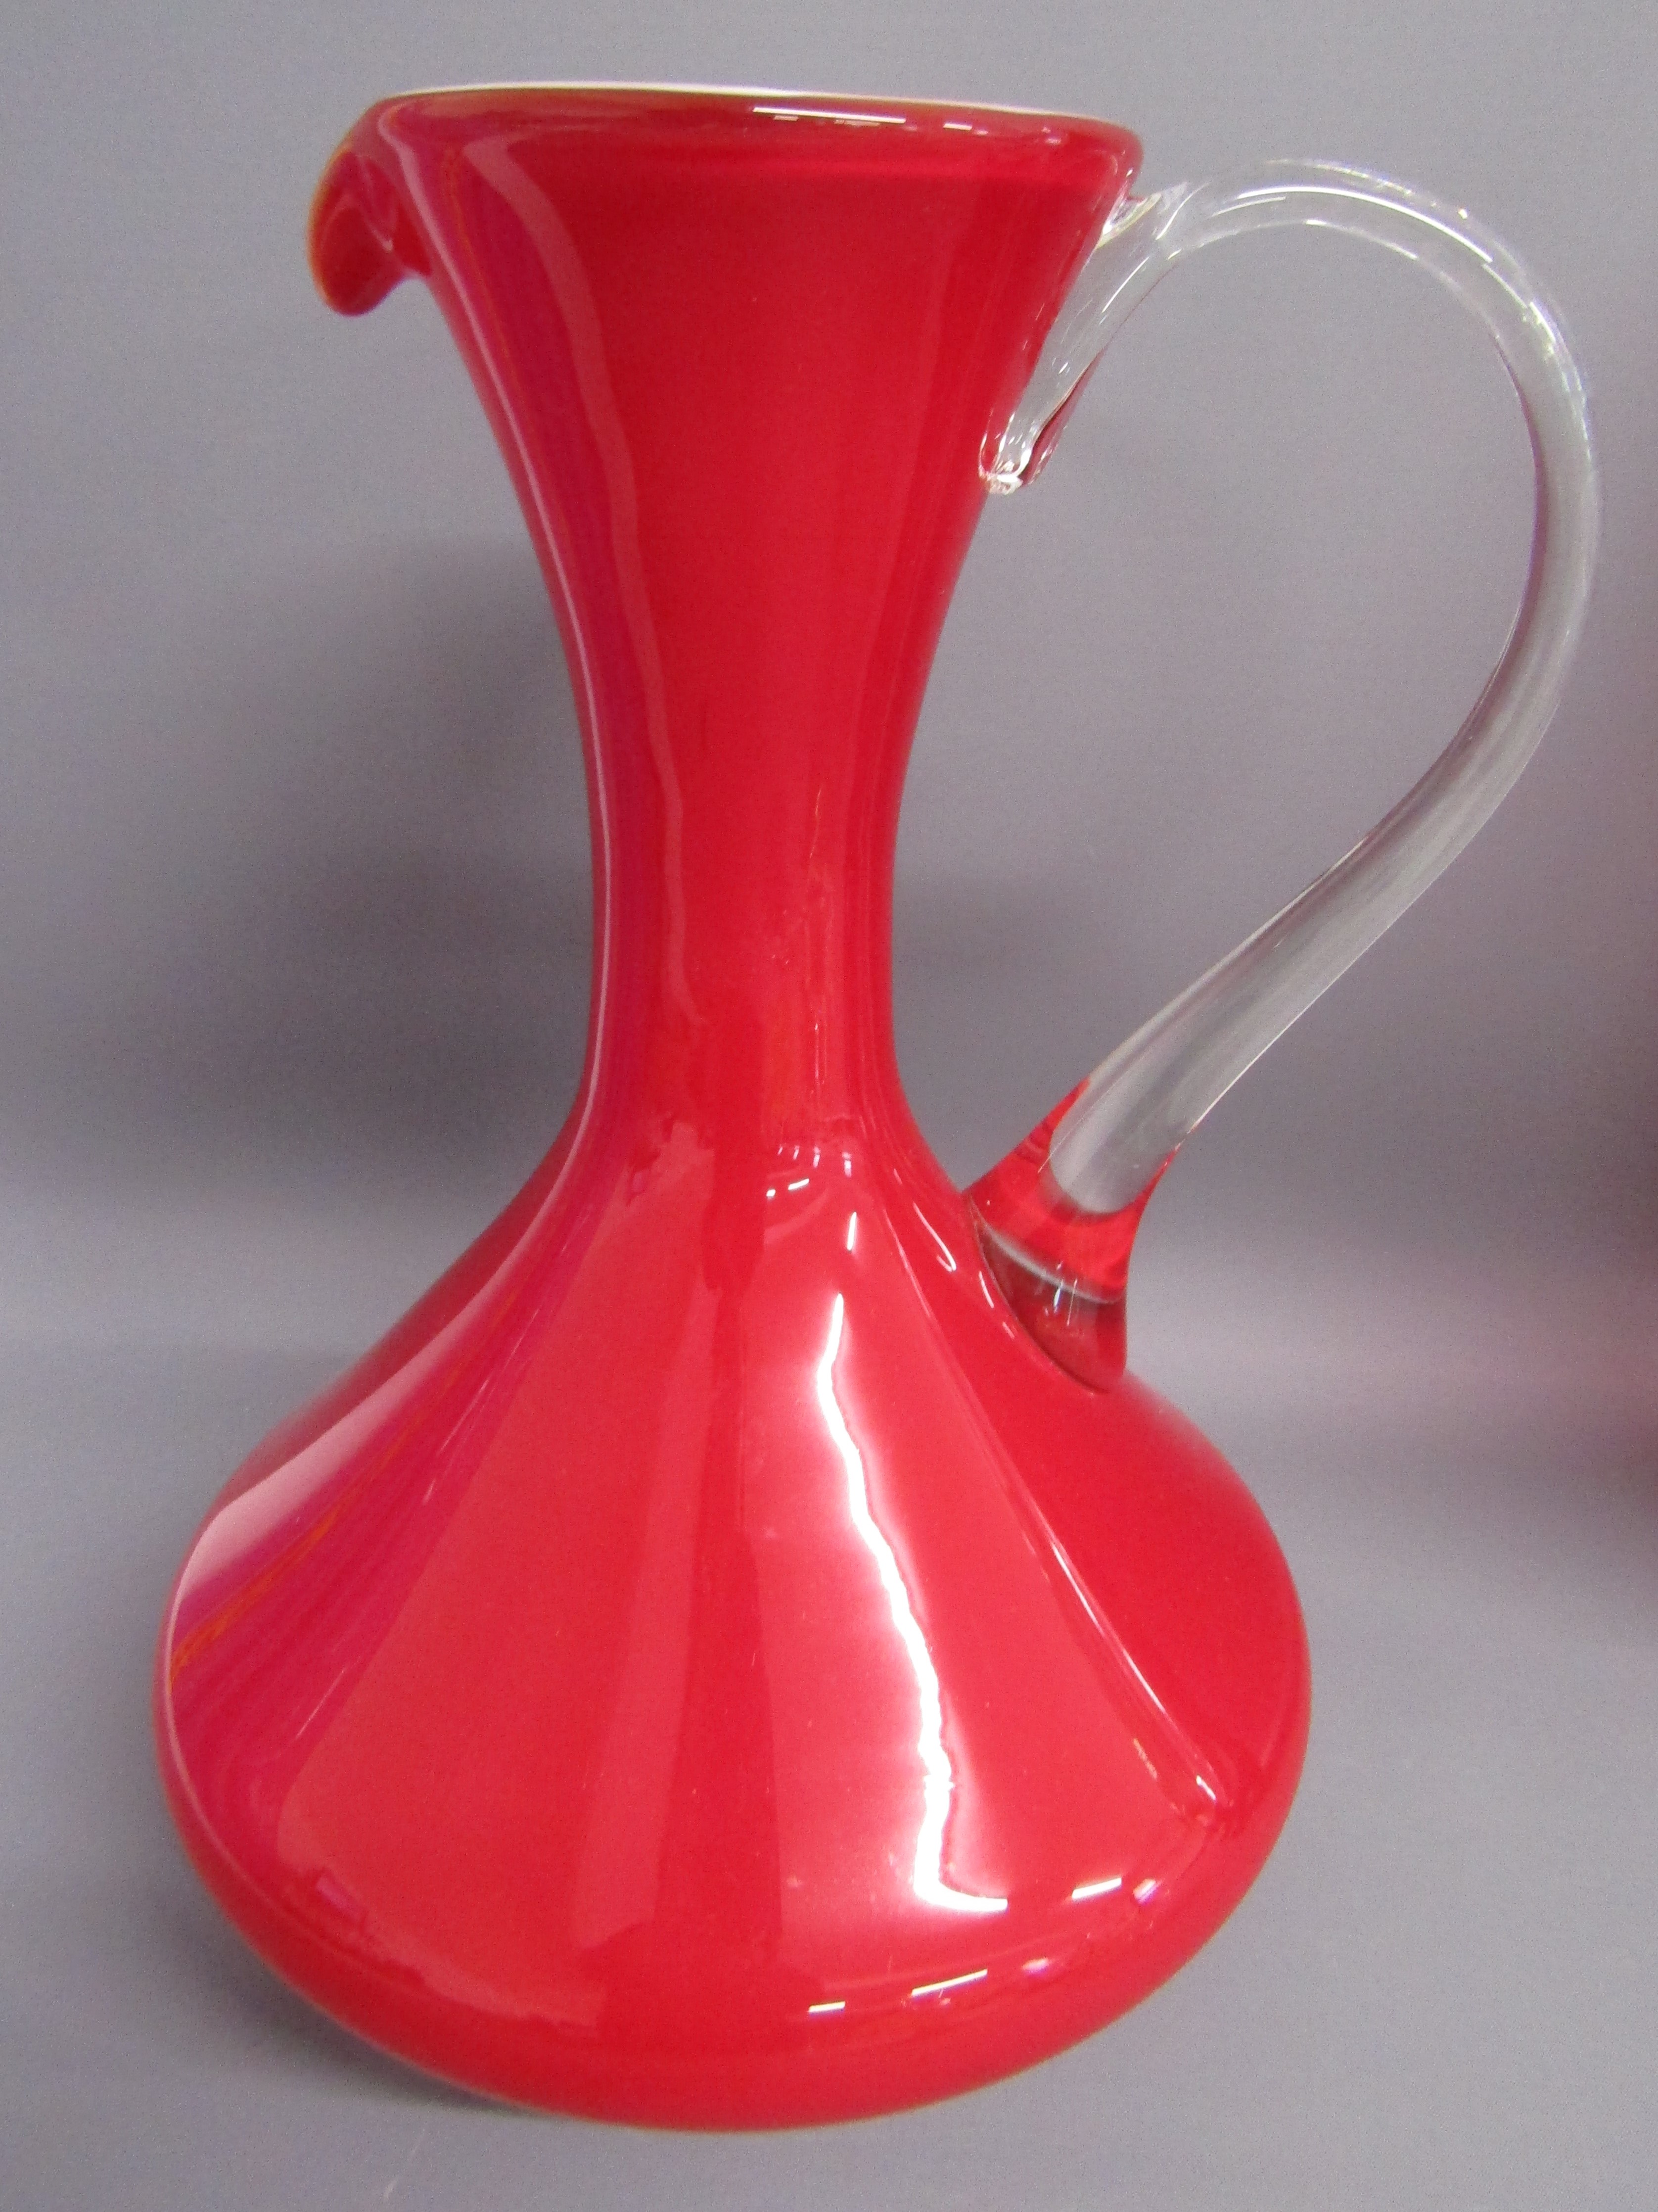 Collection of coloured glass includes over-sized green glass wine glass and purple charger, red jug, - Image 3 of 6